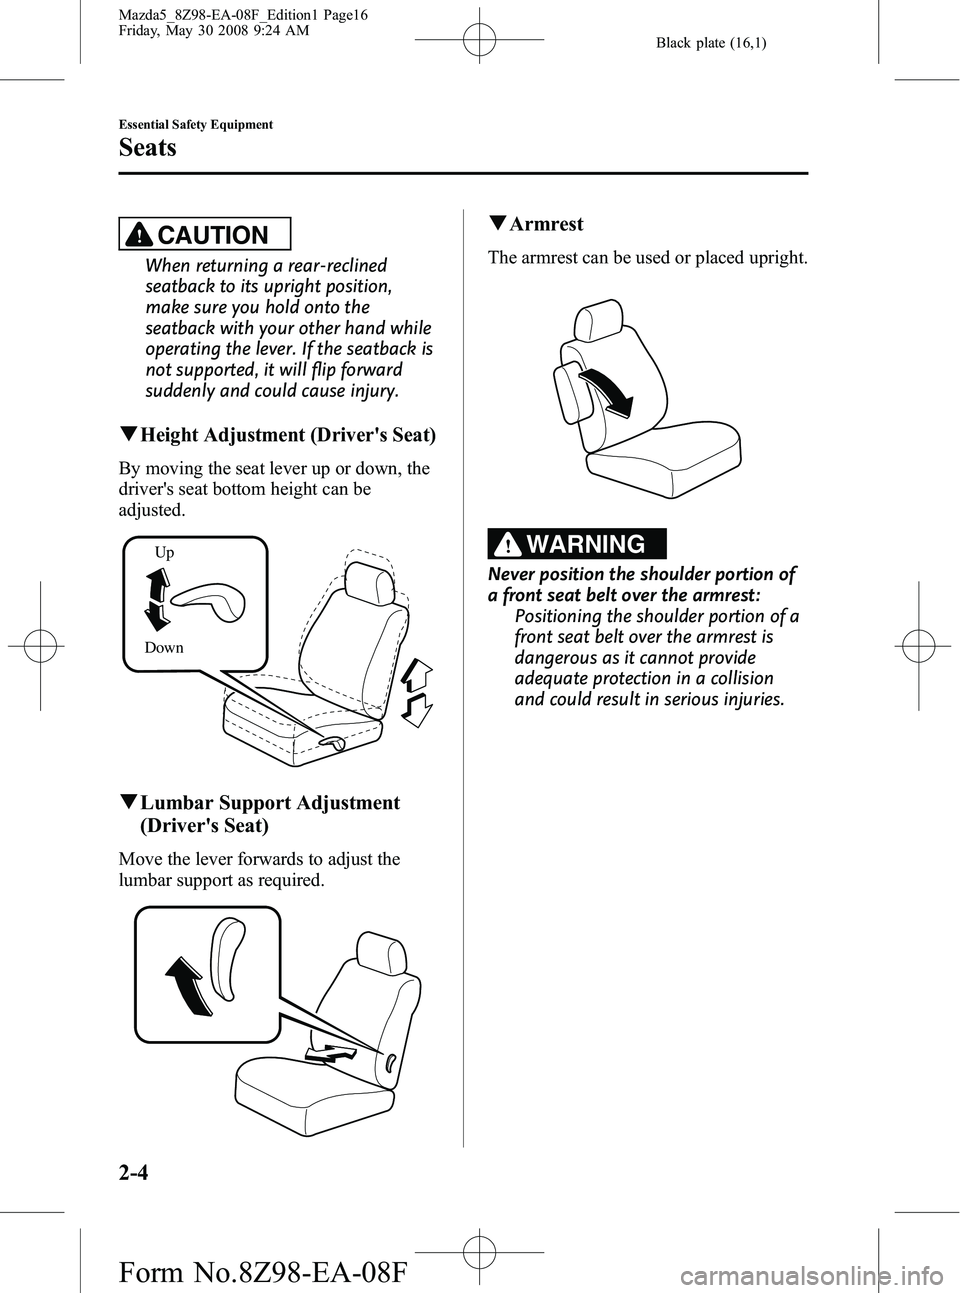 MAZDA MODEL 5 2009 User Guide Black plate (16,1)
CAUTION
When returning a rear-reclined
seatback to its upright position,
make sure you hold onto the
seatback with your other hand while
operating the lever. If the seatback is
not 